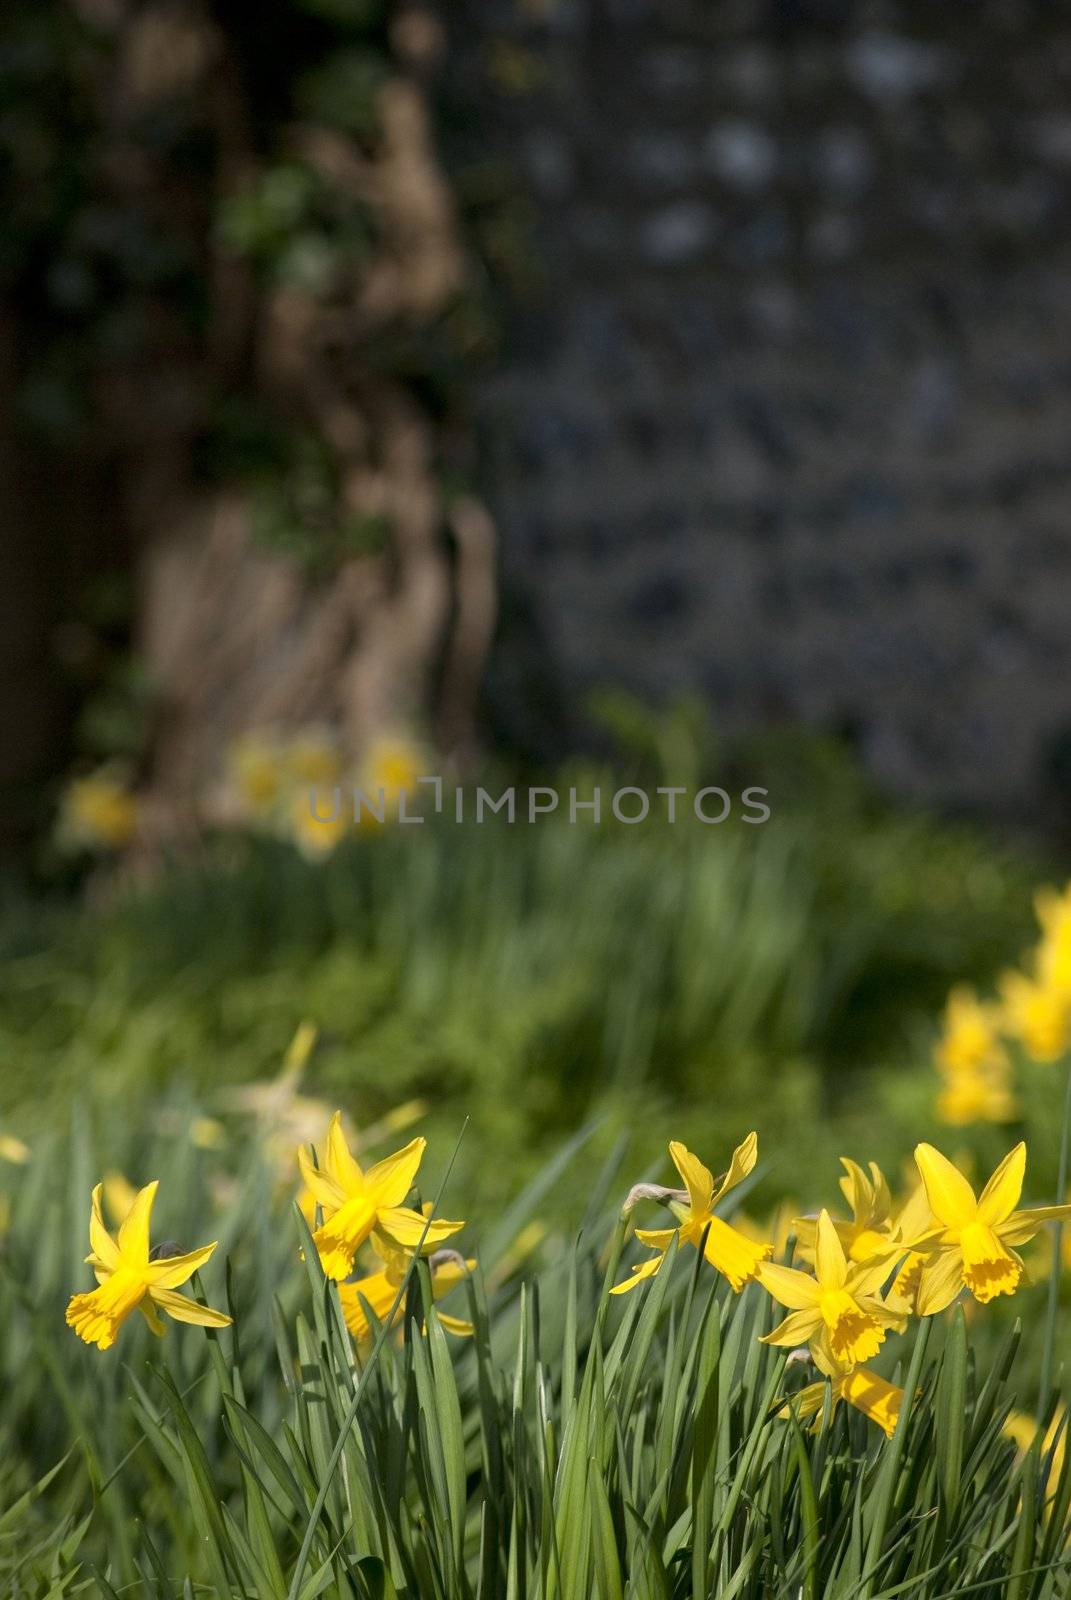 Daffodils and long grass in focus in brightly sunlit foreground with soft focus background of a shaded, gnarled, twisted old tree and an ancient flint stone wall. Portrait orientation.